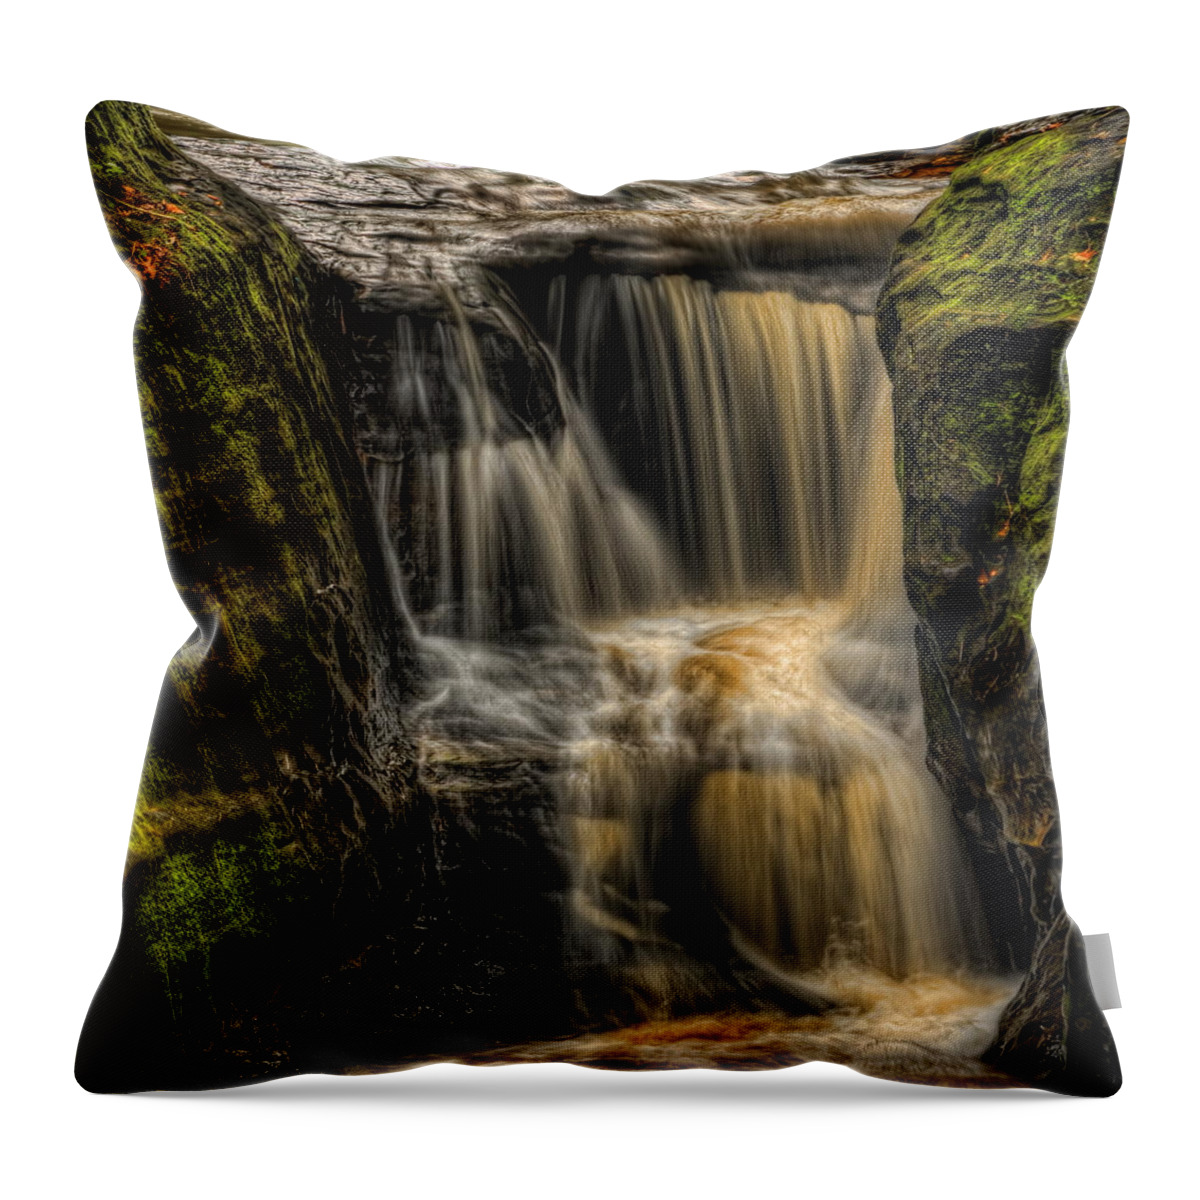 Pewits Nest Throw Pillow featuring the photograph Pewits Nest Middle Falls Square by Dale Kauzlaric